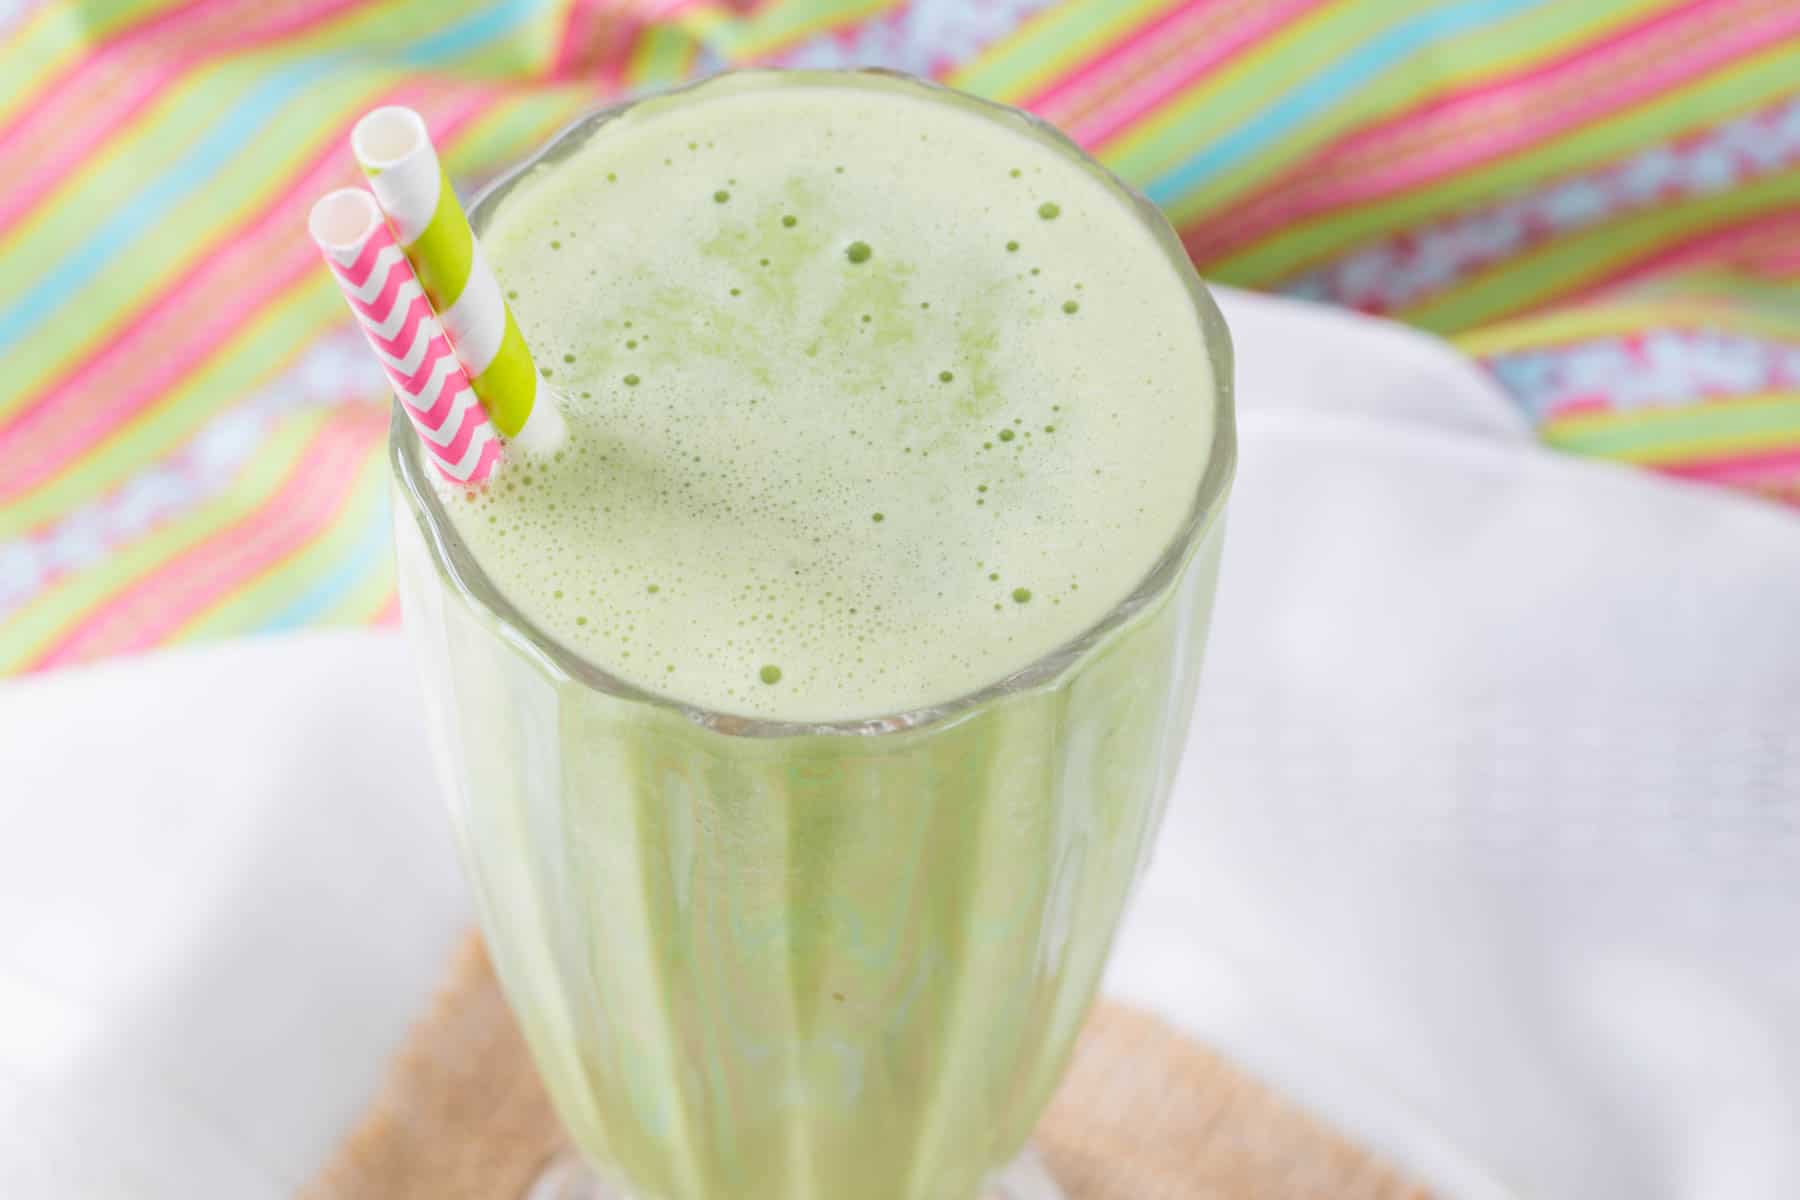 A shamrock shake smoothie in a glass with a pink and white straw and a green and white straw.